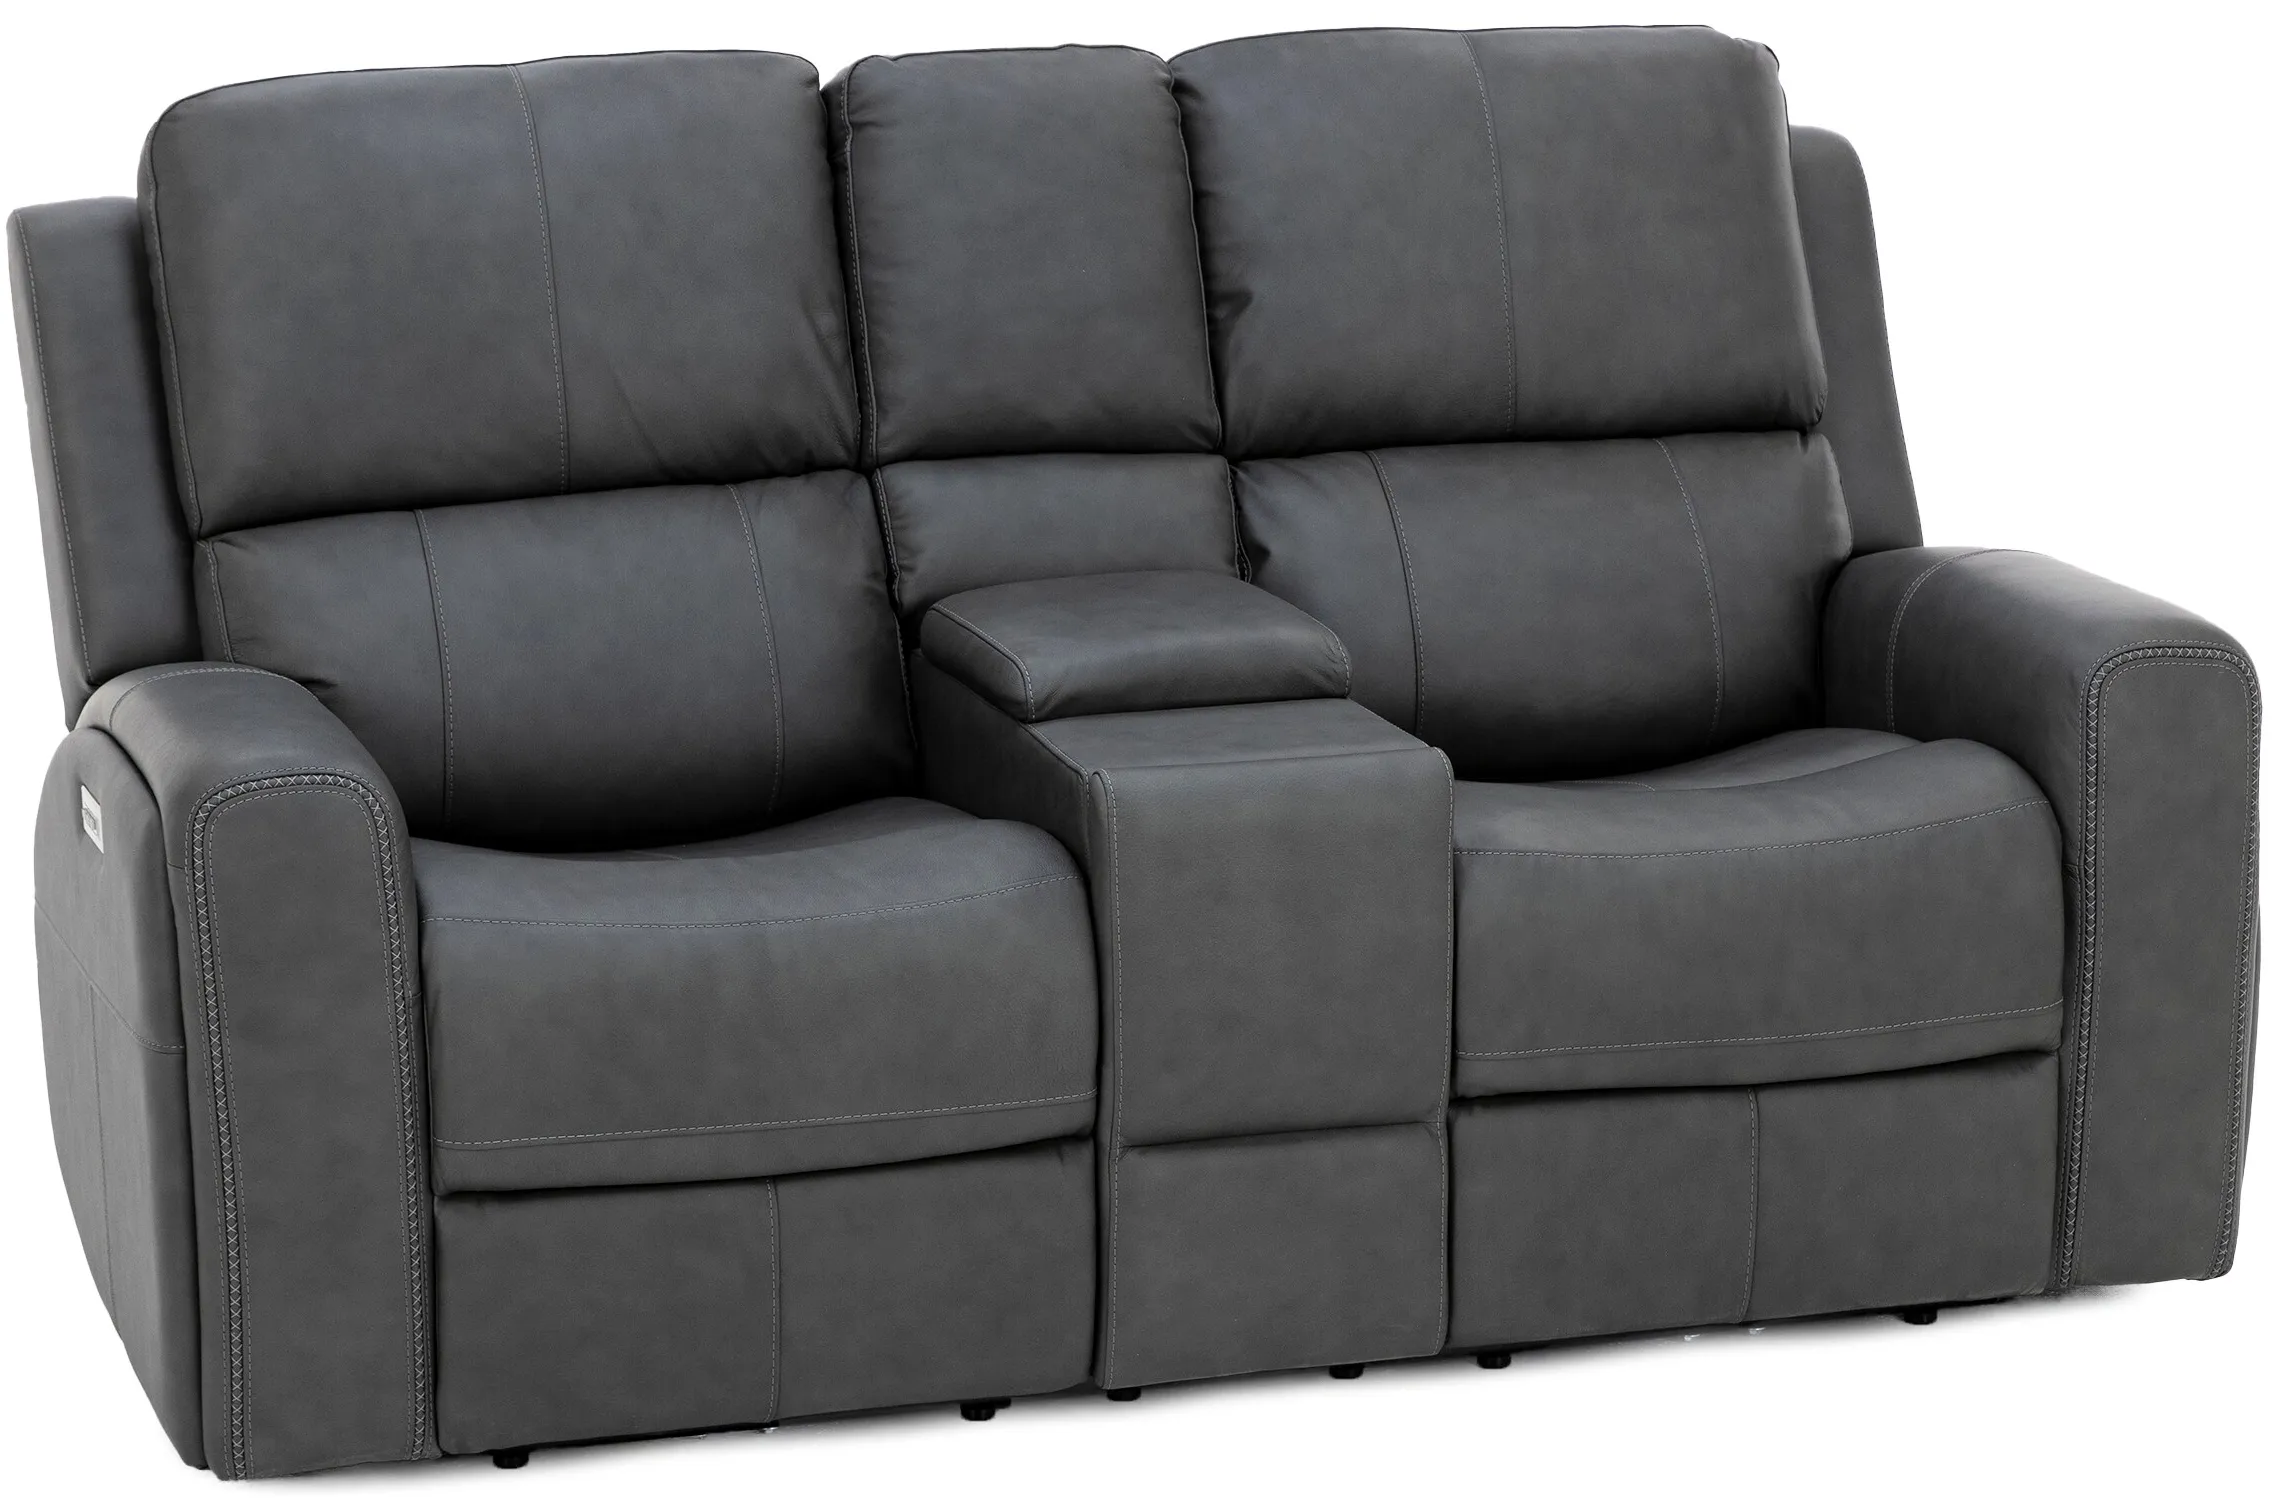 Landon Leather Zero Gravity Fully Loaded Reclining Console Loveseat in Charcoal